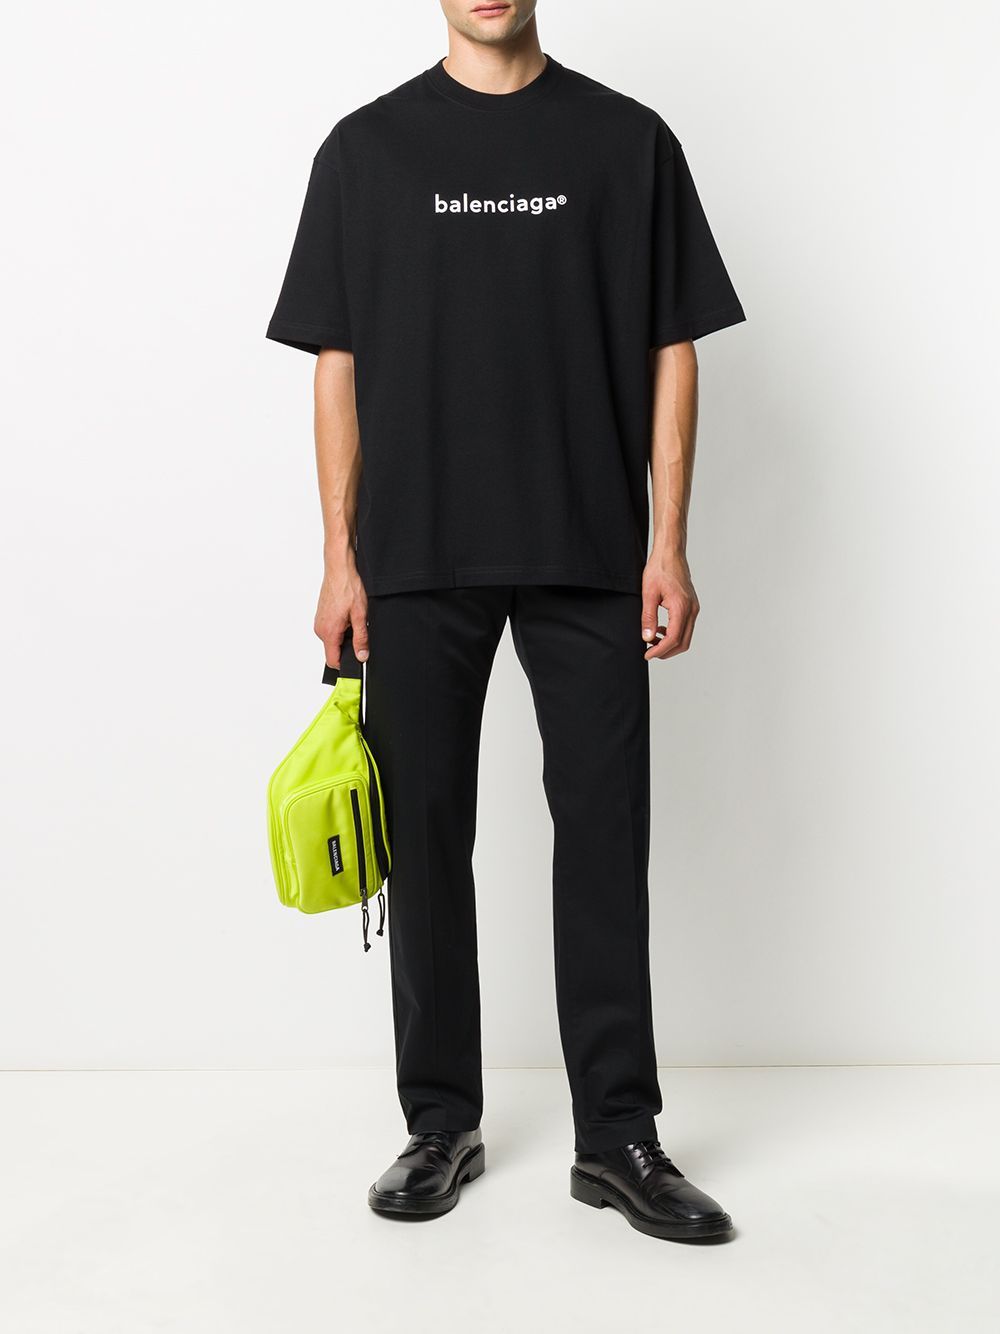 Balenciaga Copyright Brown T Shirt  Olivers Archive